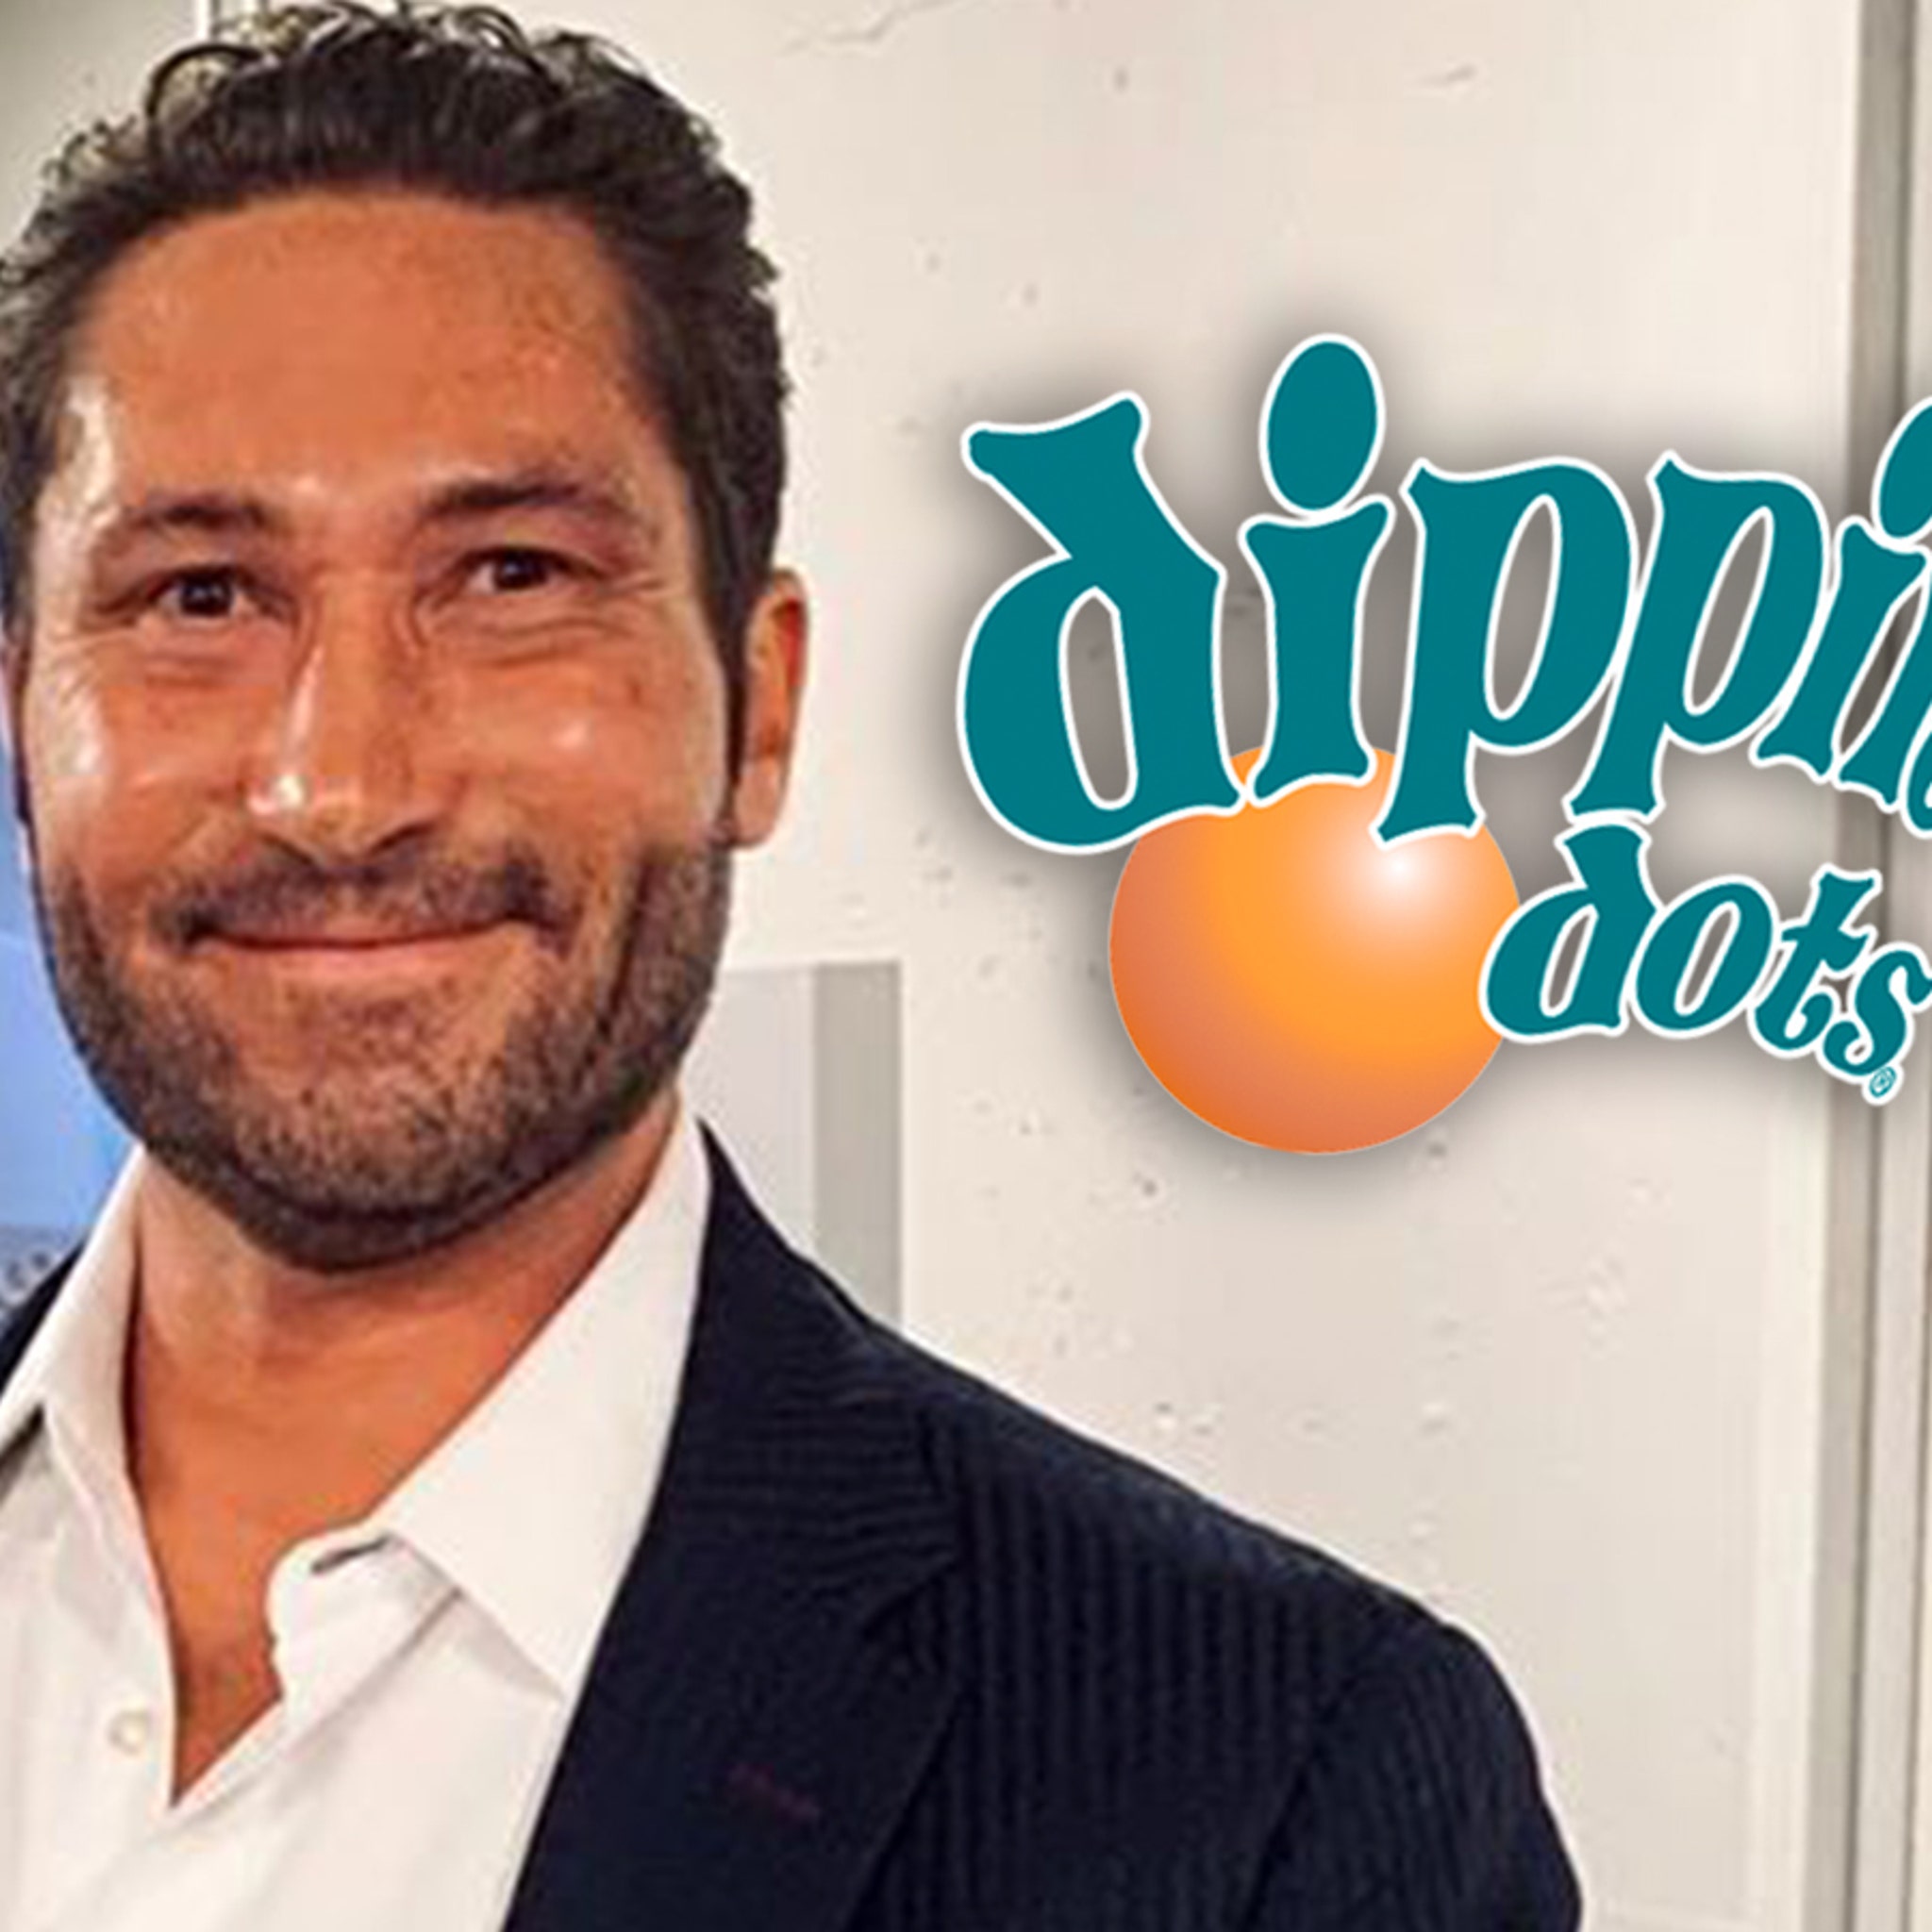 Dippin Dots CEO Sued by Ex-Girlfriend Over Alleged Revenge Porn